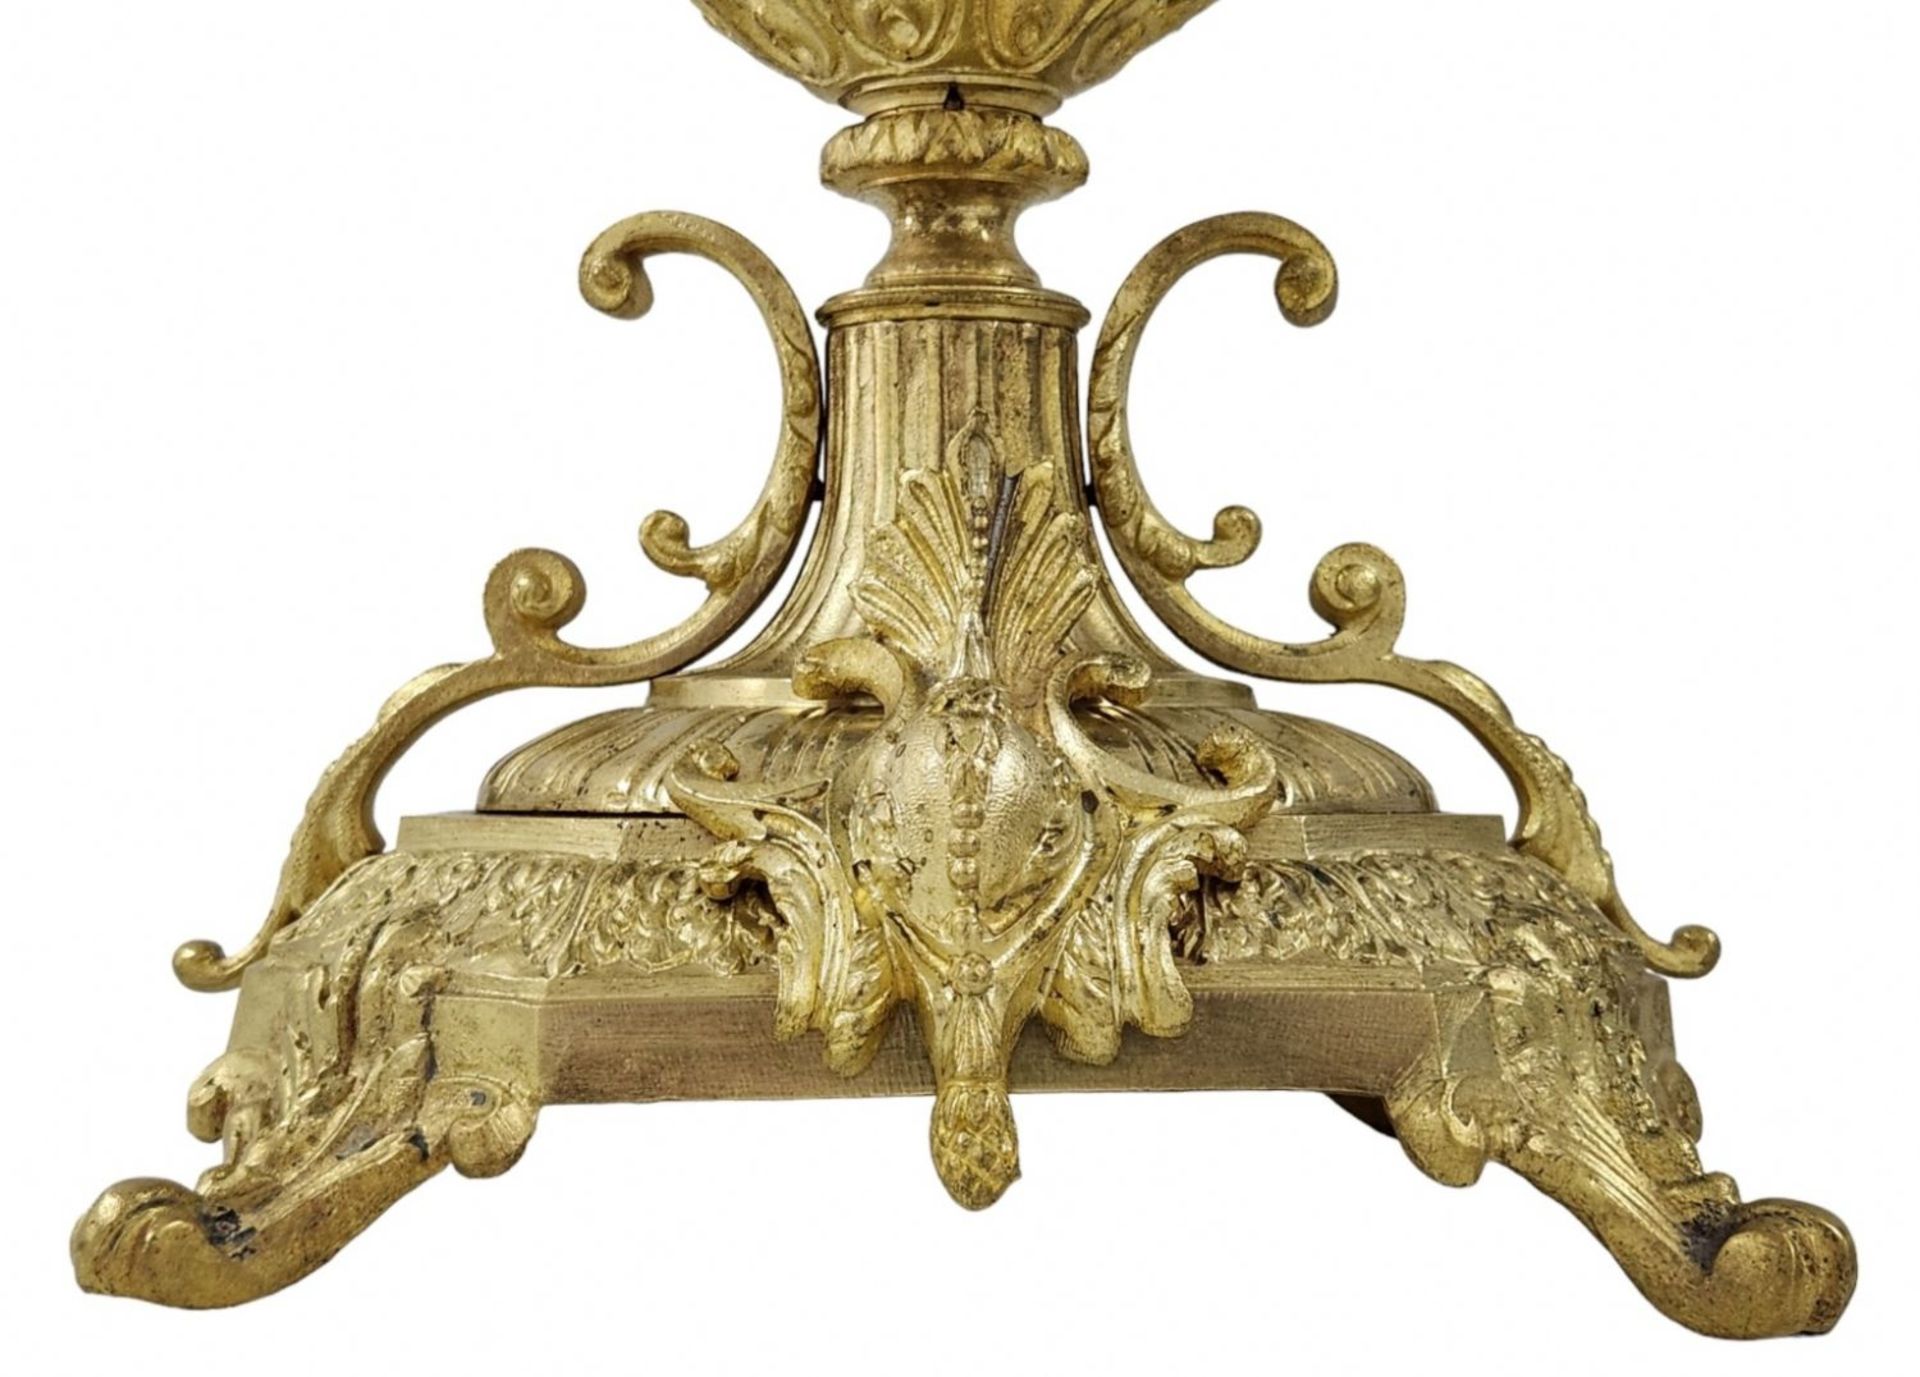 Antique French Garniture, impressively large and luxurious, includes a mantle clock and a pair of - Image 10 of 10